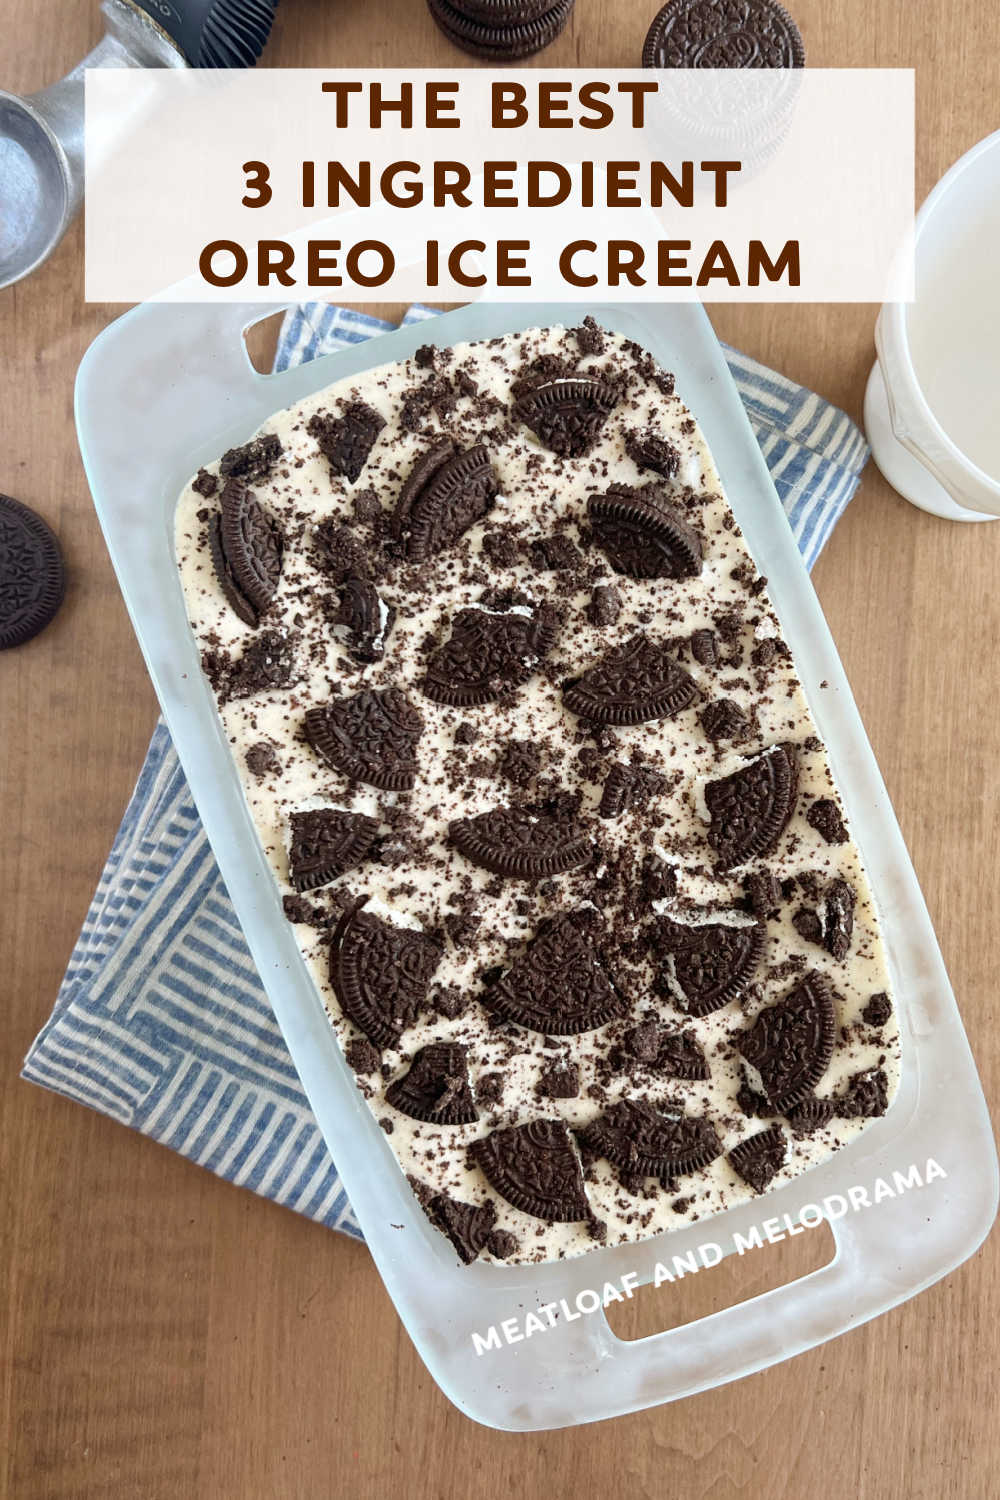 This Easy Oreo Ice Cream recipe with 3 ingredients makes homemade ice cream without an ice cream maker. No-churn Oreo ice cream (cookies and cream ice cream) is a quick and easy dessert for the whole family to enjoy. via @meamel